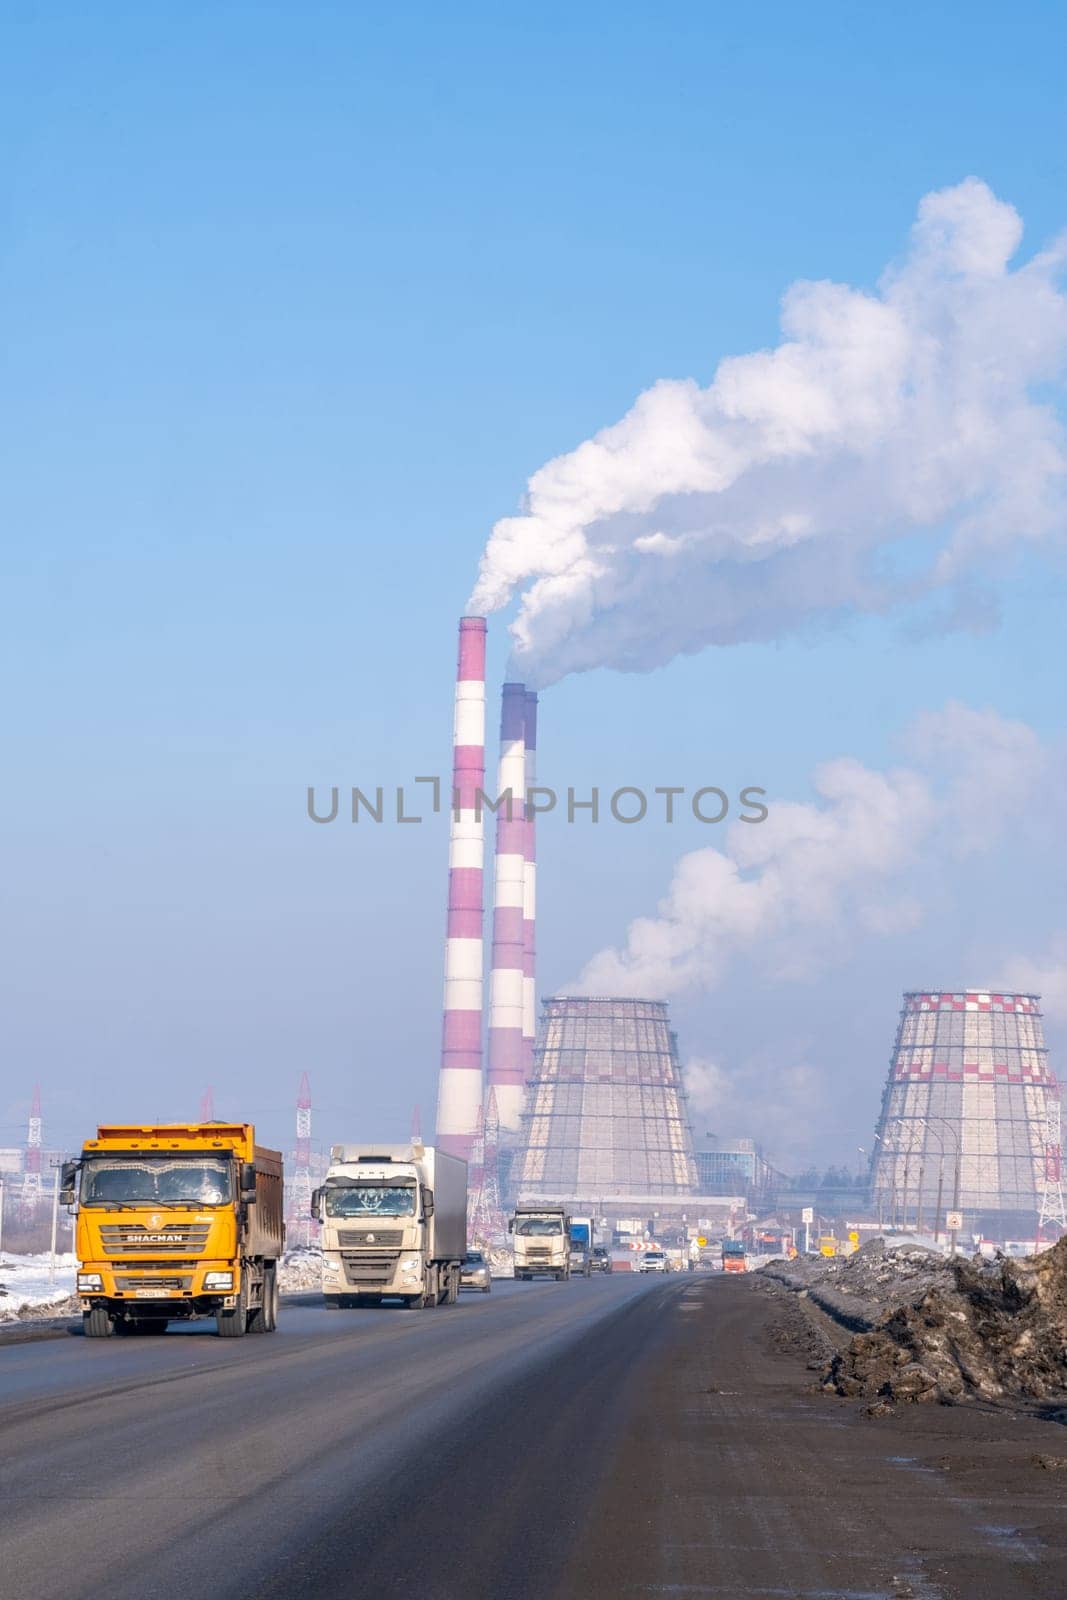 Sky filled with smoke from factory chimneys near automotive buildings by AnatoliiFoto